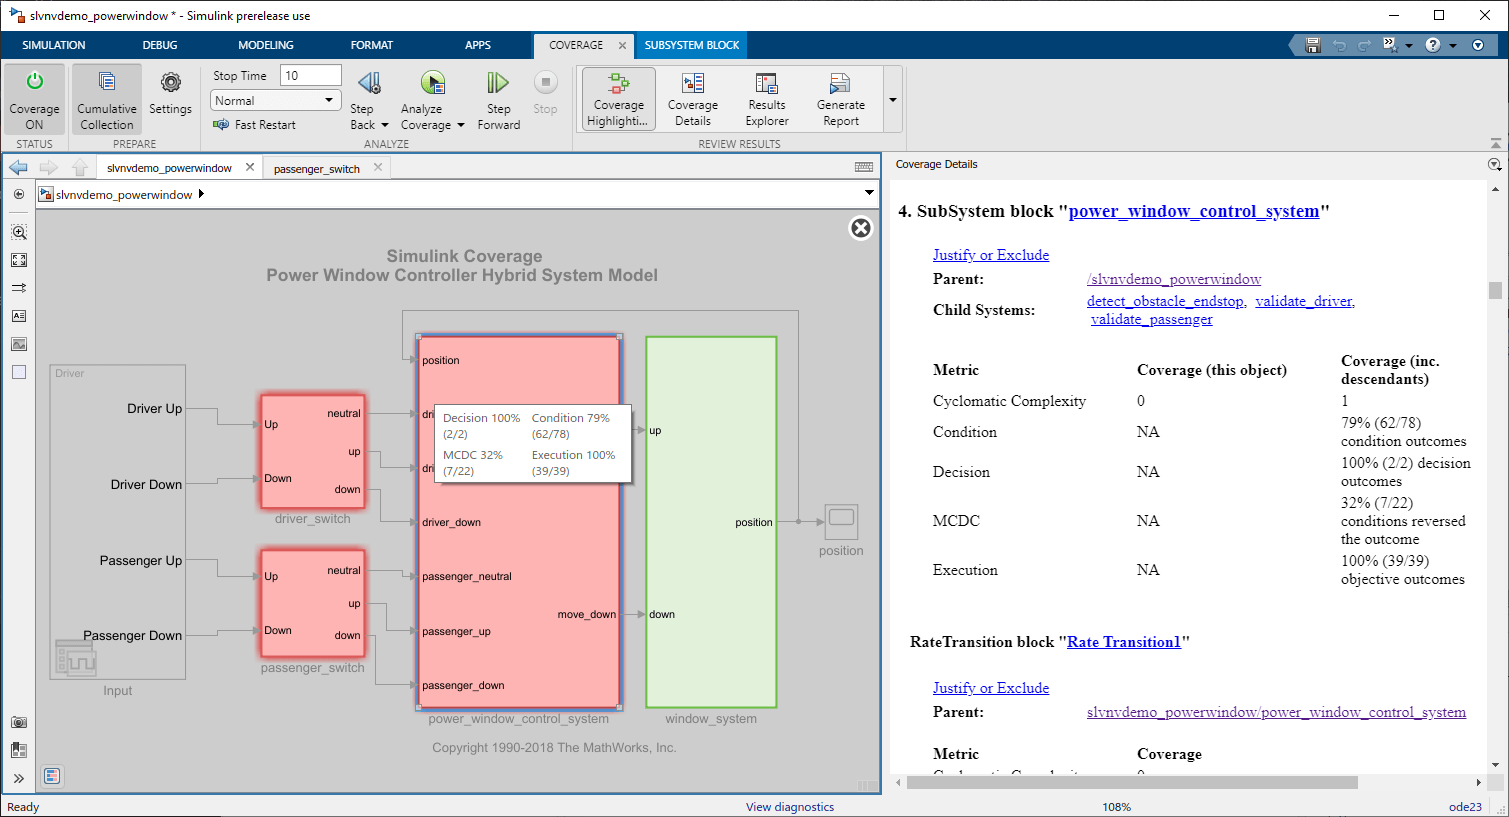 Simulink window after clicking on a subsystem. The docked coverage report shows the section of the report that details coverage results for the subsystem.